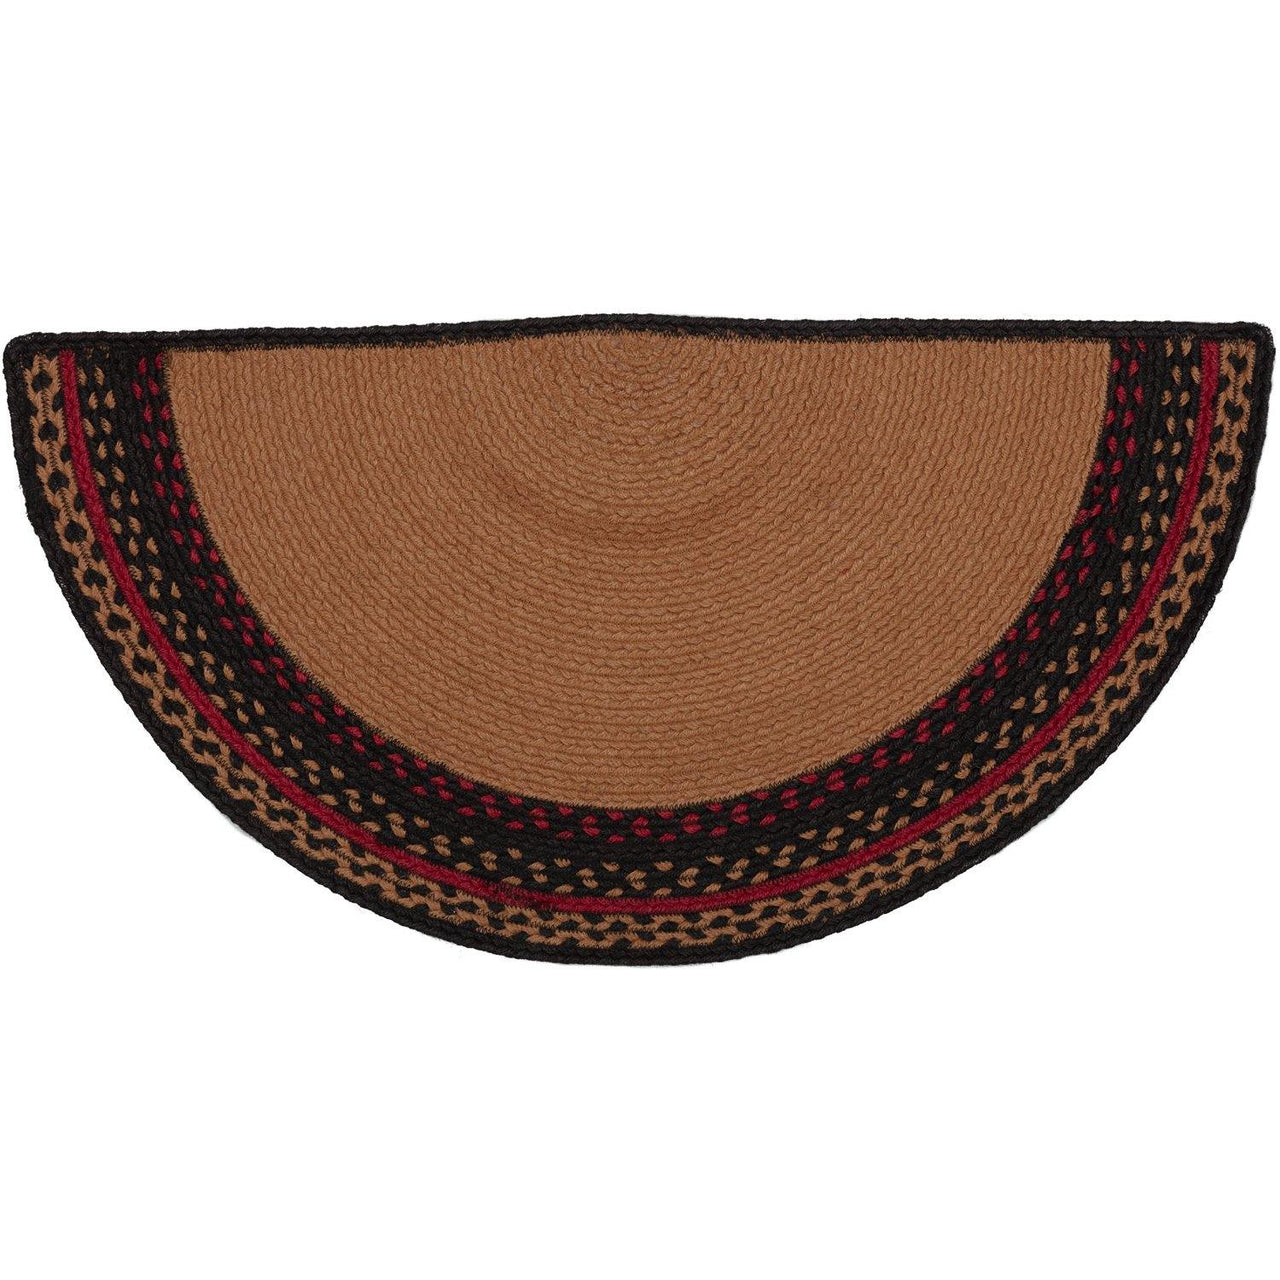 Cumberland Stenciled Moose Jute Braided Rug Half Circle Welcome to the Cabin 16.5"x33" with Rug Pad VHC Brands - The Fox Decor